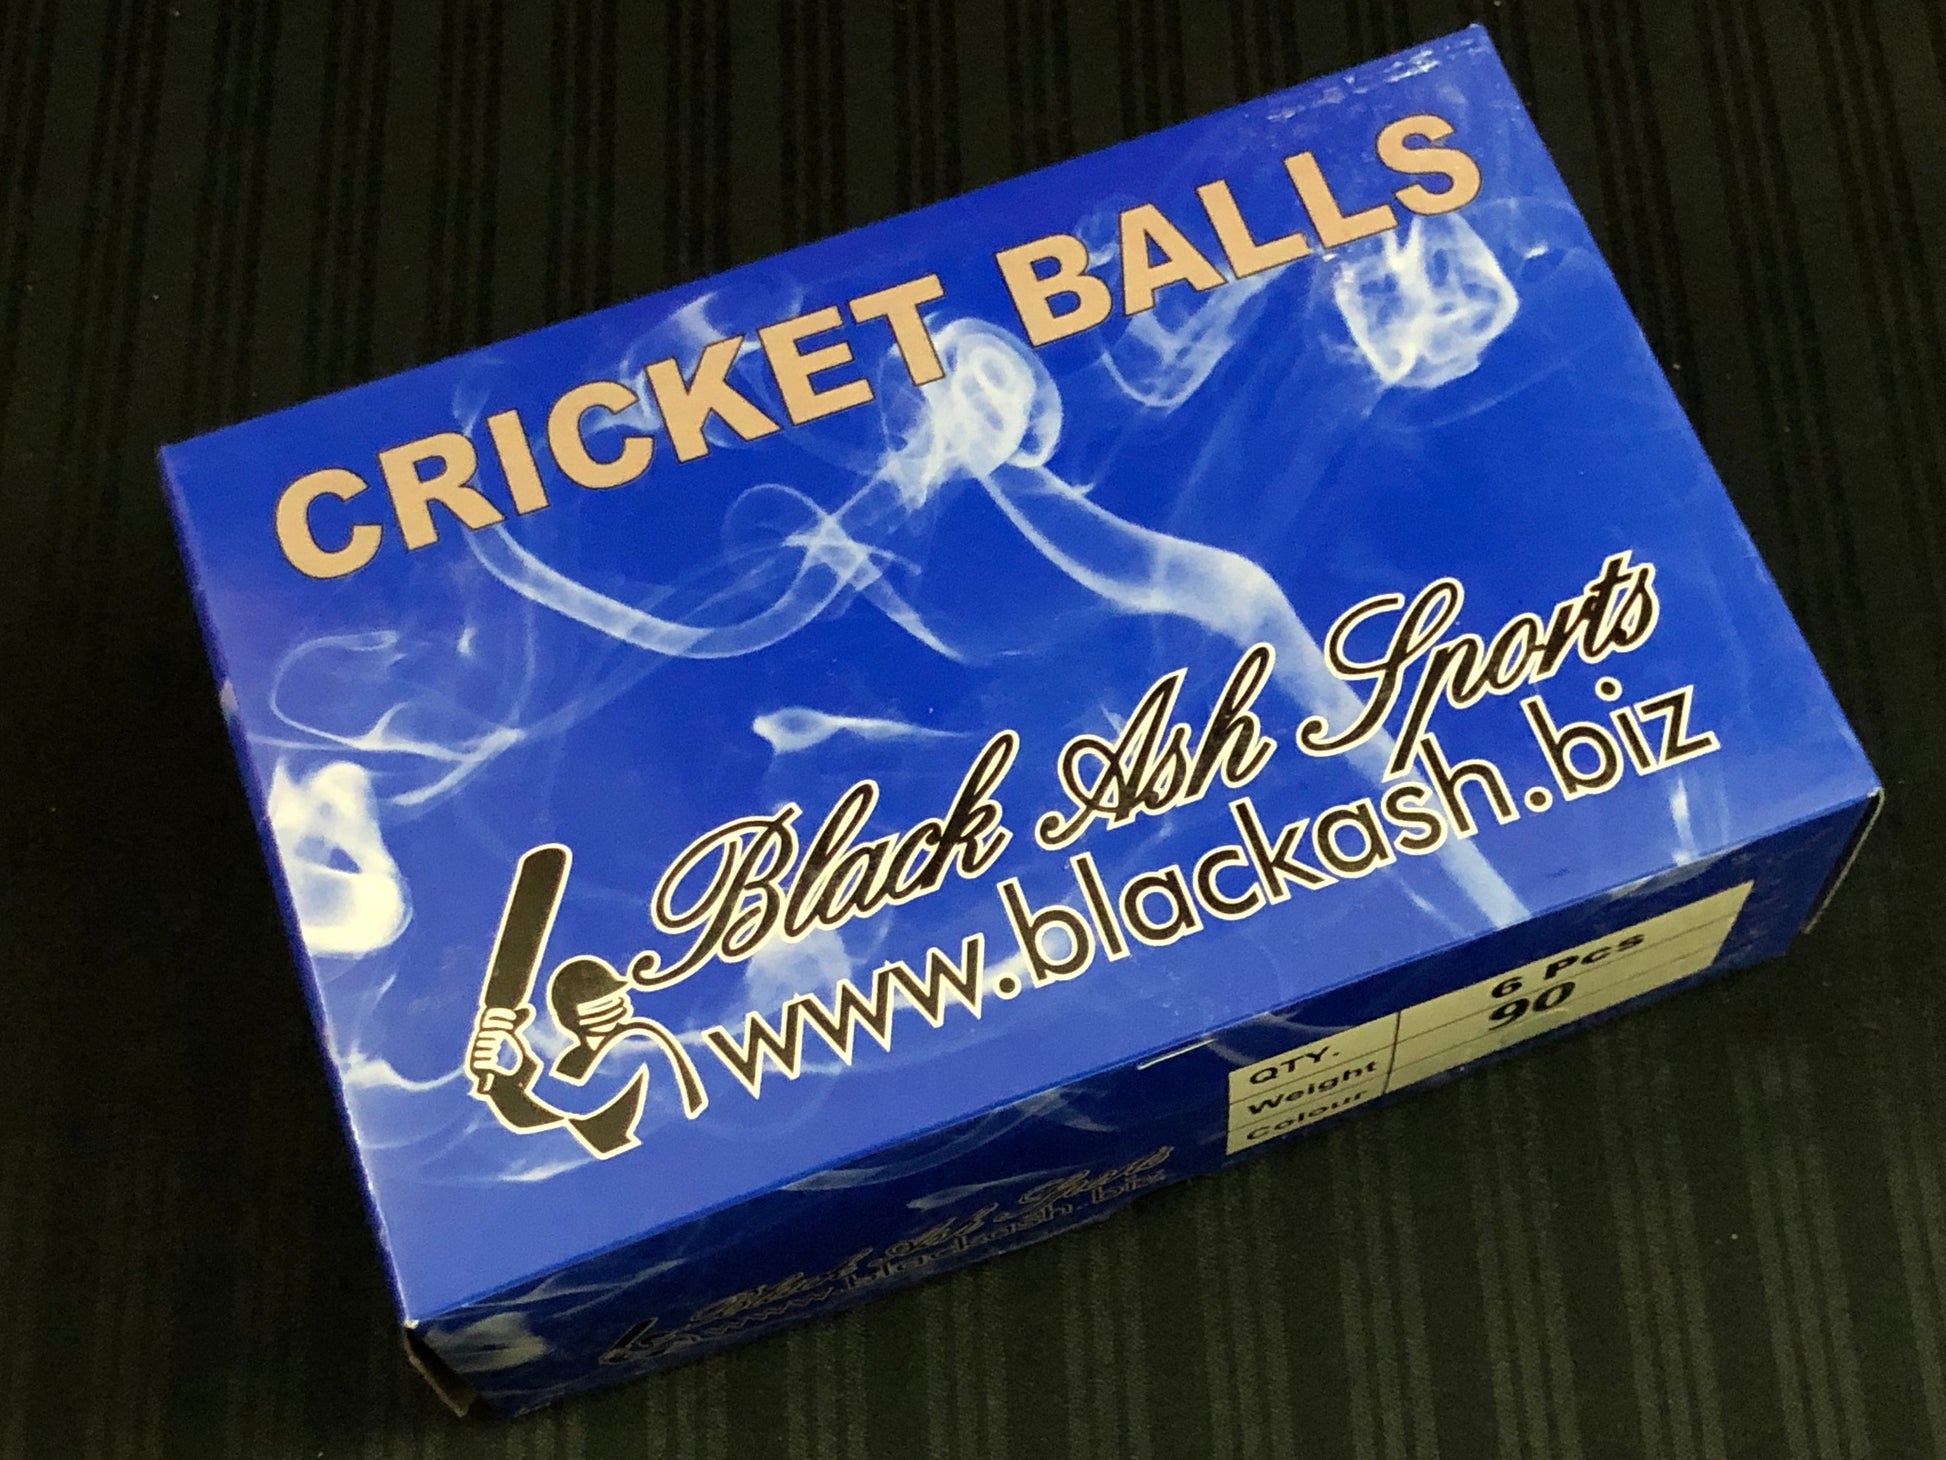 Pack of 6 white Black Ash PVC soft cricket training balls, each weighing 90 grams, designed for coaching and training, with a top-quality PVC construction and soft center, suitable for indoor and outdoor use.